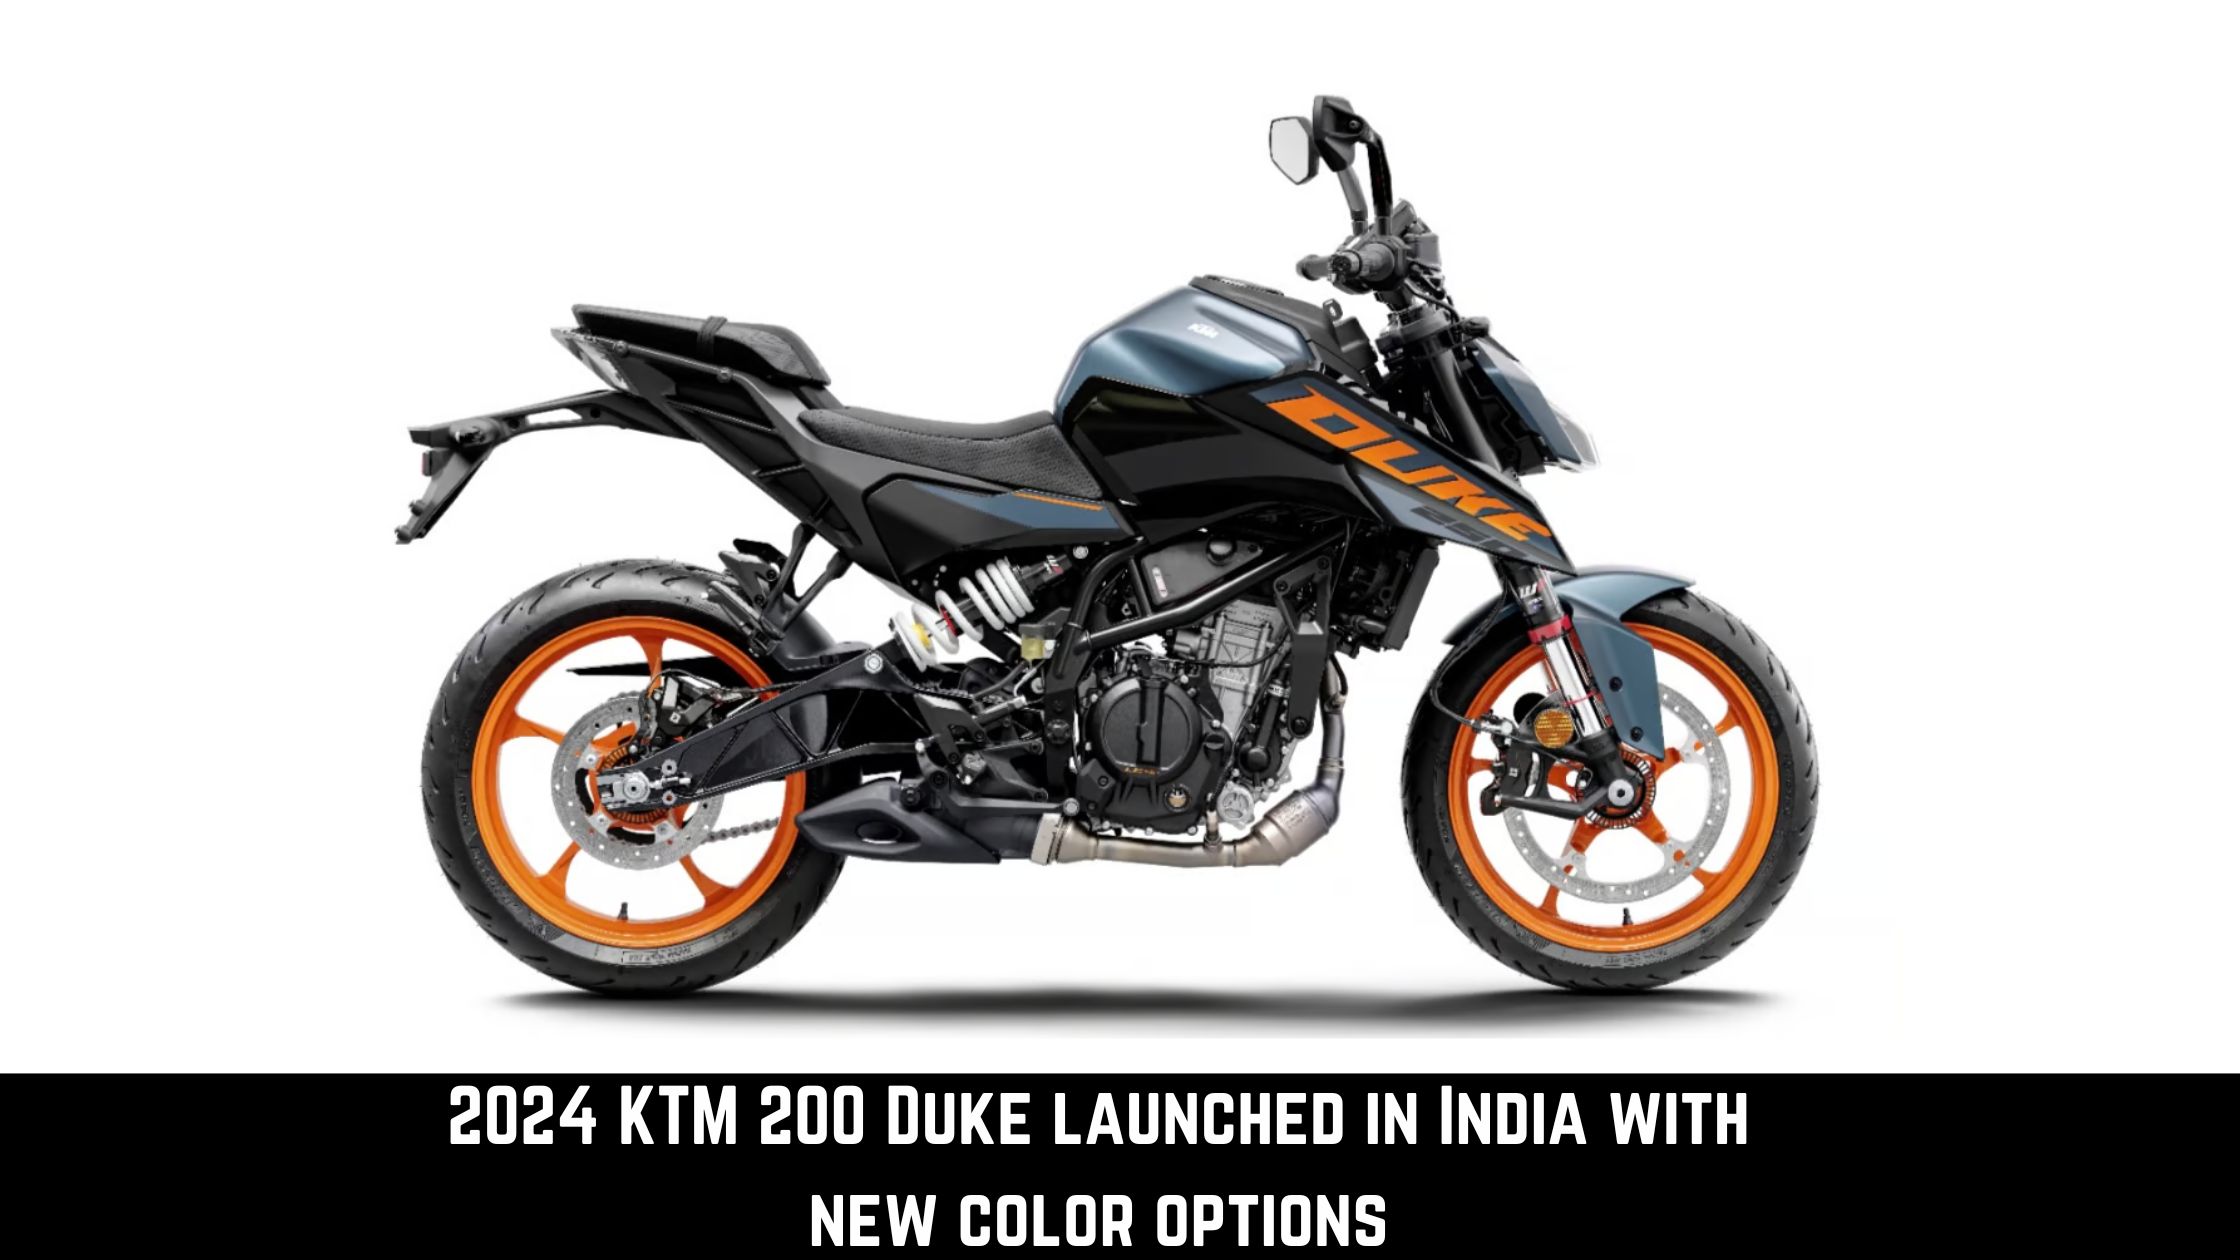 2024 KTM 200 Duke launched in India with new color options